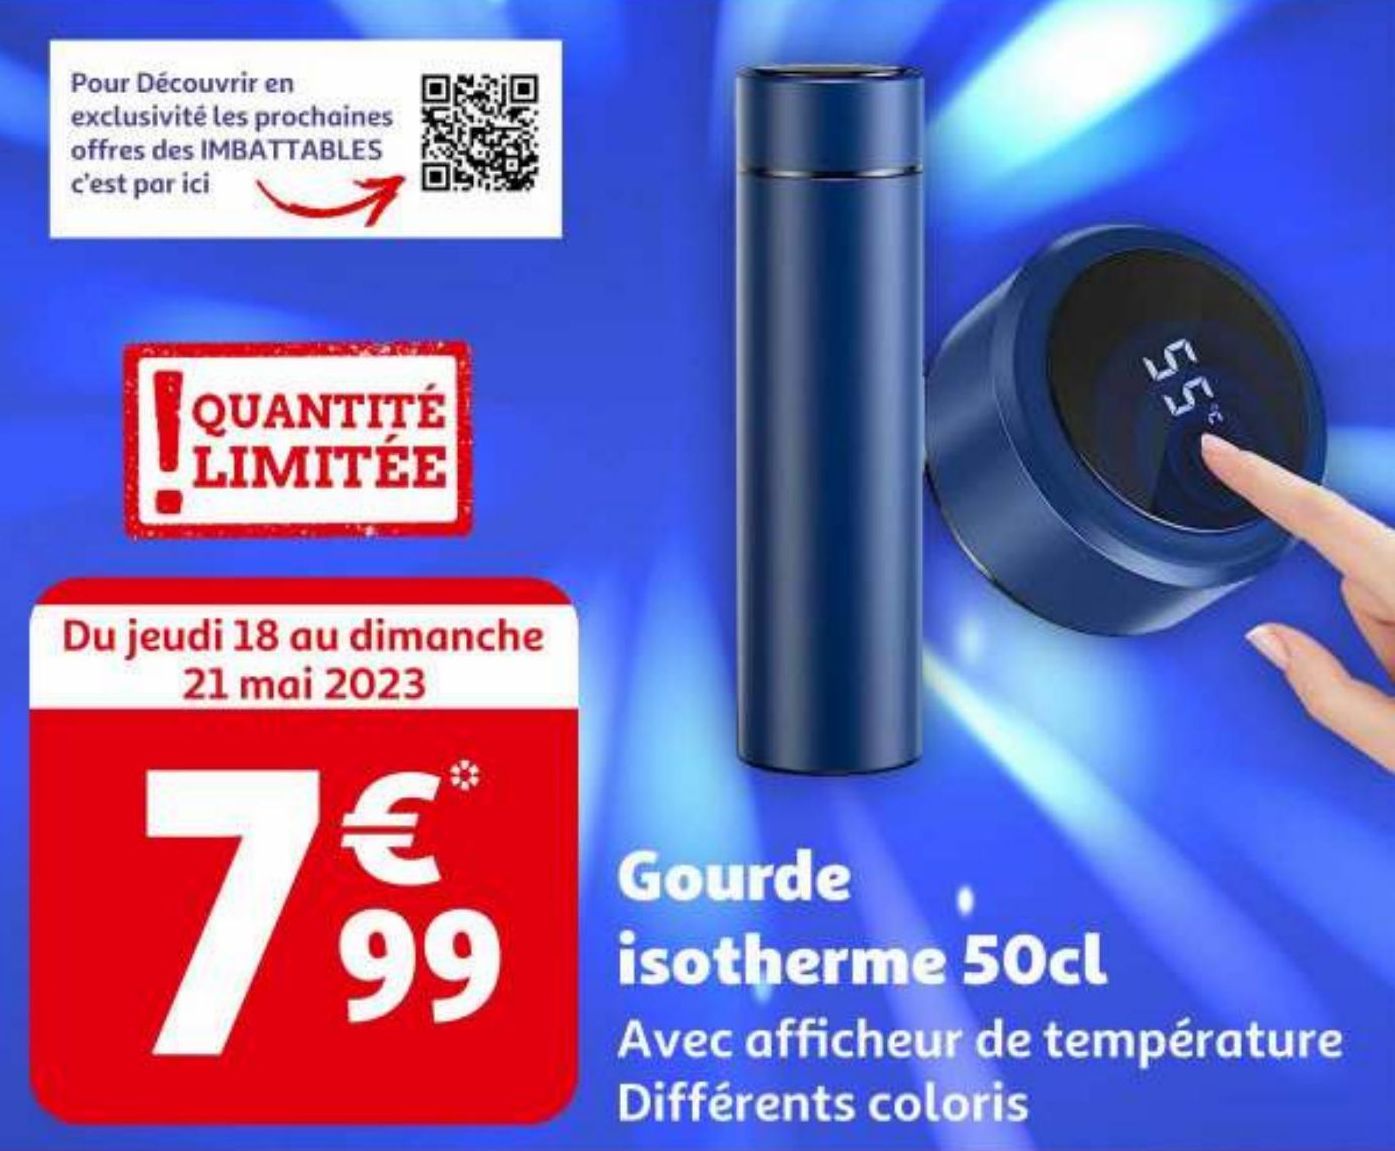 Gourde isotherme 50cl